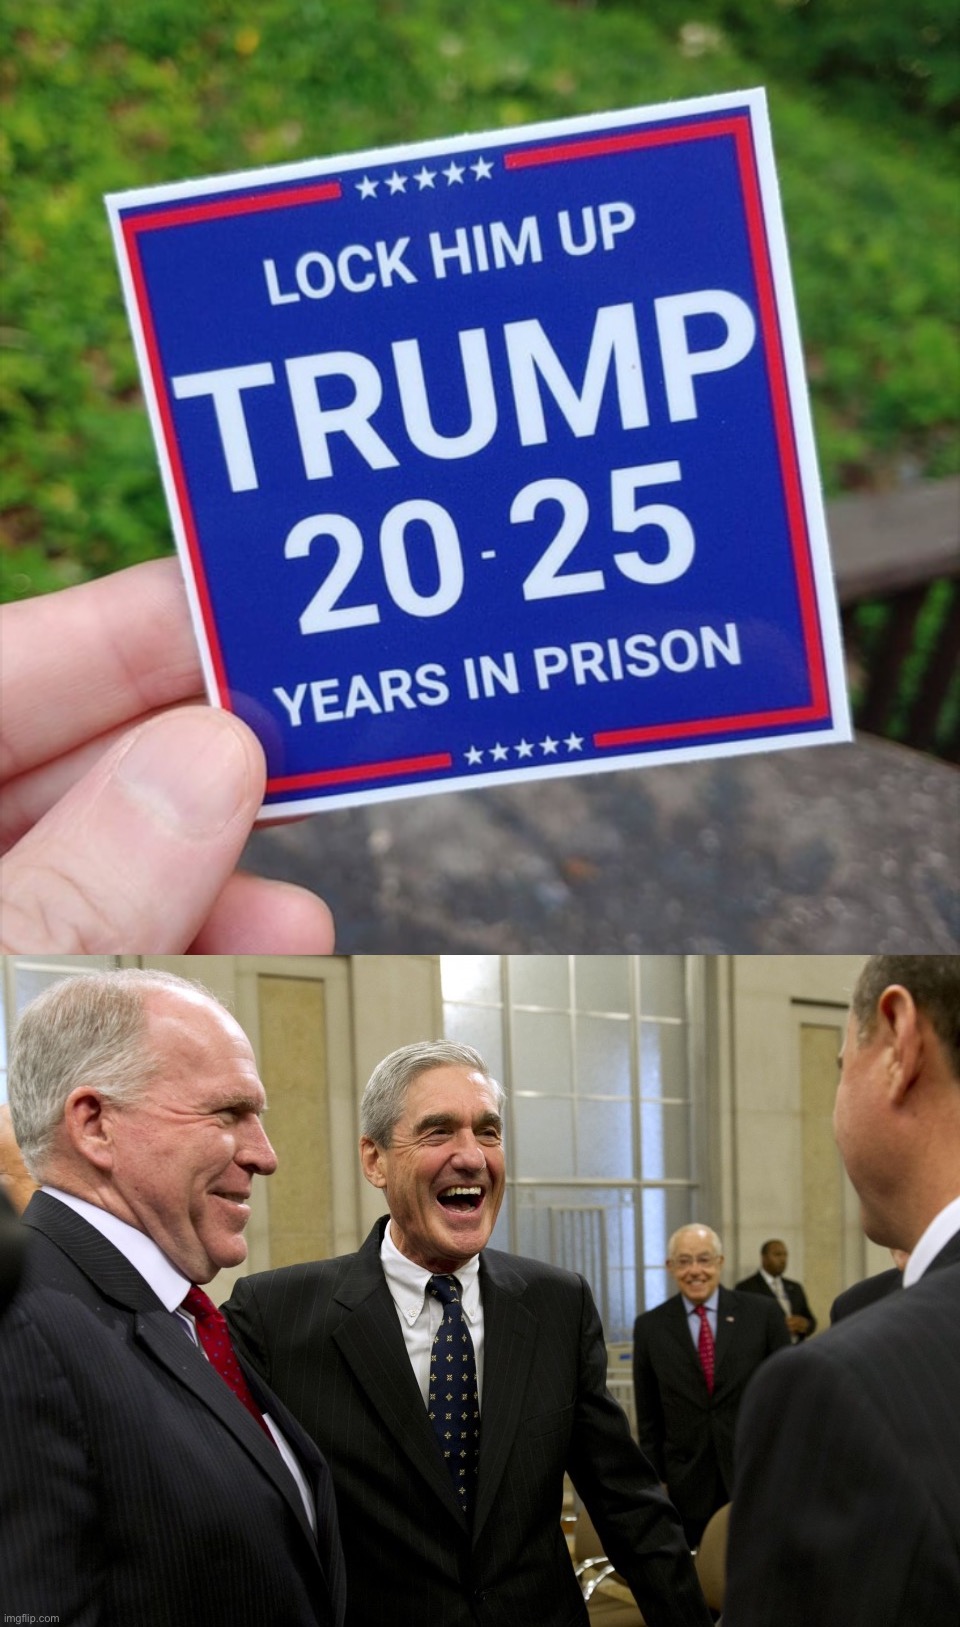 Fake news, Russiagate was a hoax, they stole our line & there’s not even an election in 2025. The Left can’t meme. MAGA! | image tagged in lock him up trump 20-25 years,happy robert mueller,russiagate,trump for prison,lock him up,the left cant meme | made w/ Imgflip meme maker